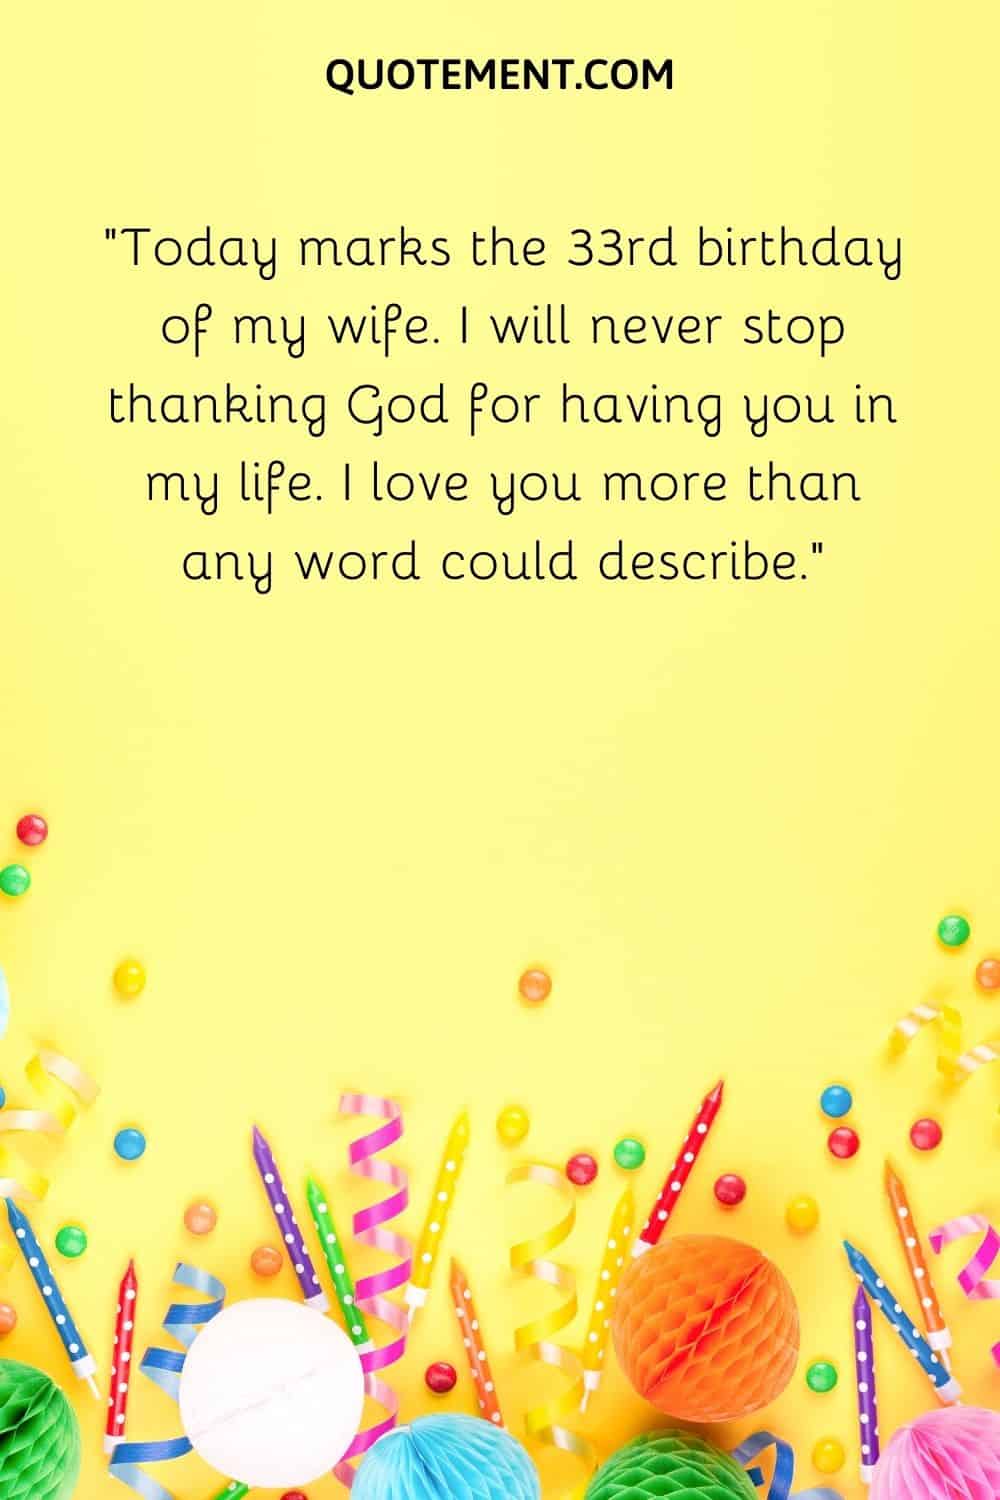 170 Cheerful & Sweet 33rd Birthday Quotes & Wishes